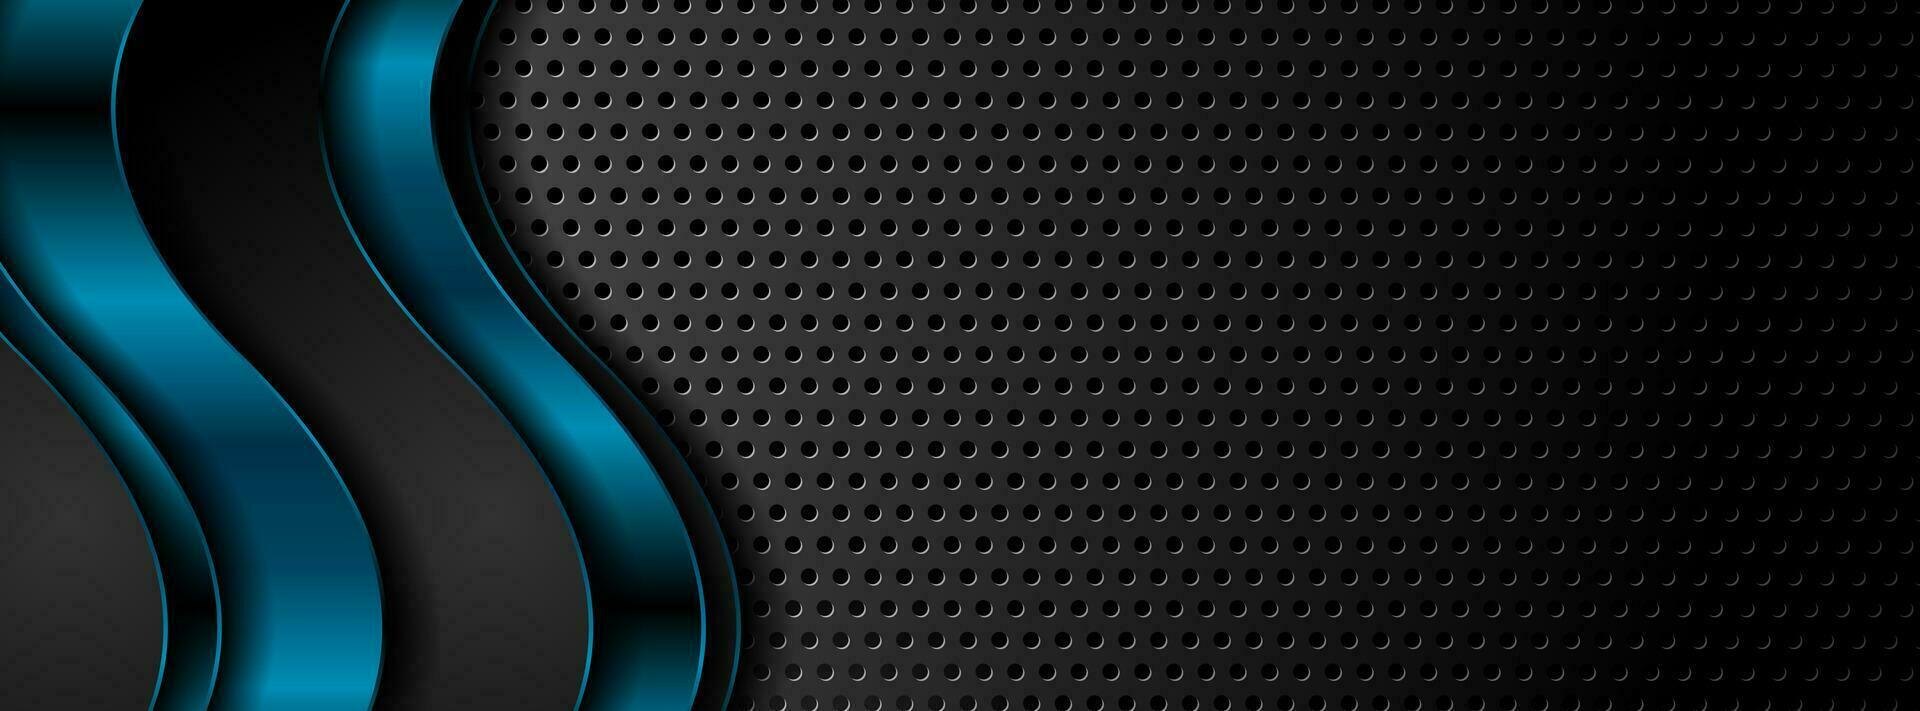 Blue and black abstract waves technology banner vector